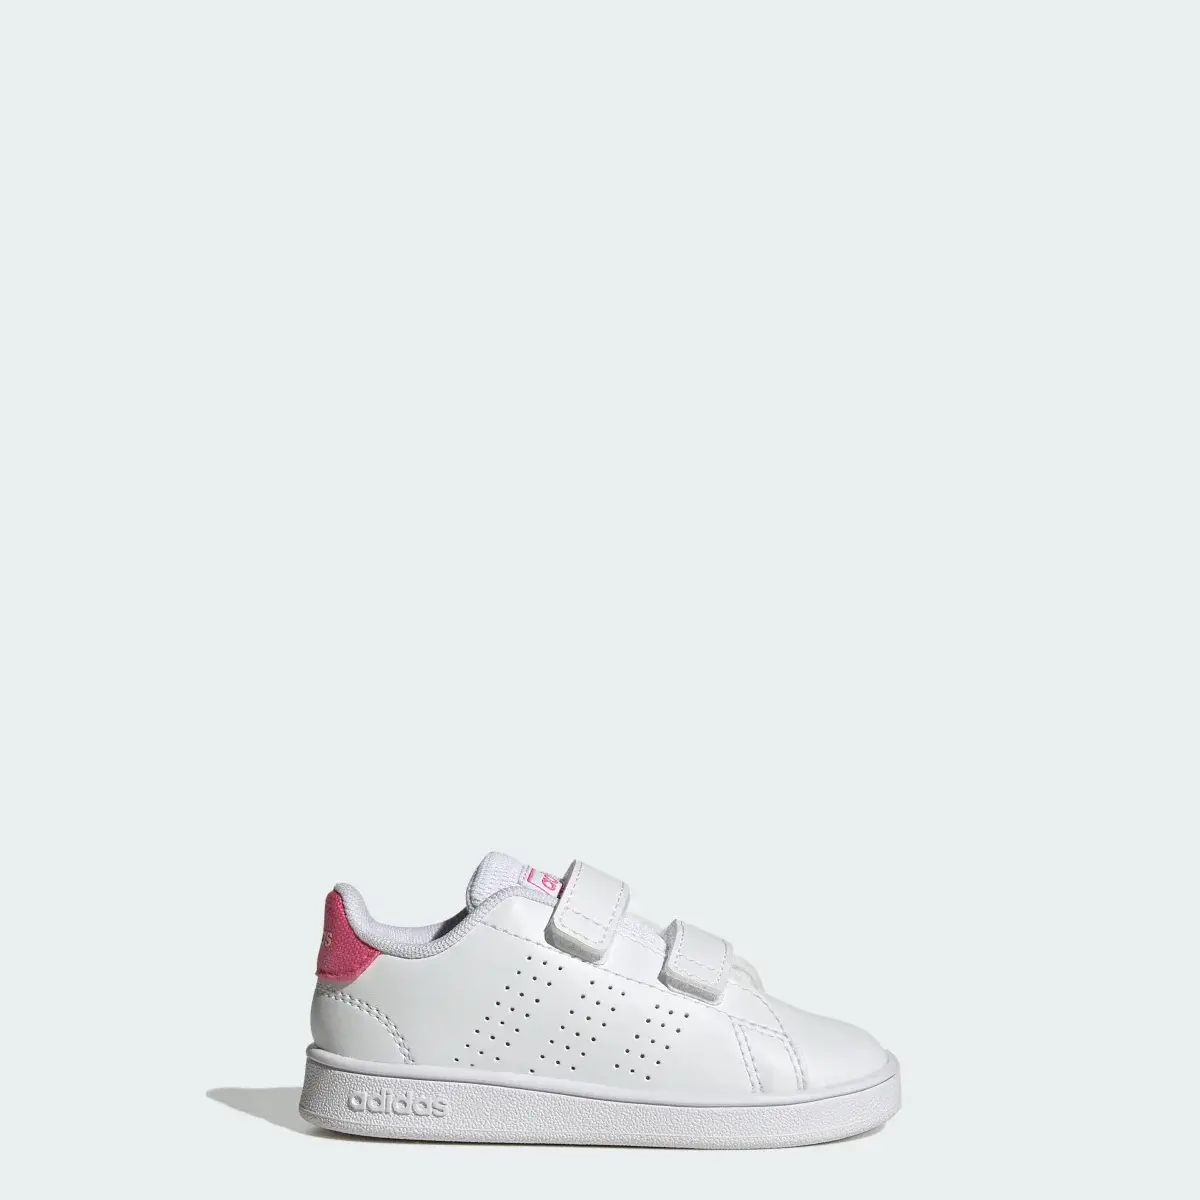 Adidas Advantage Lifestyle Court Two Hook-and-Loop Shoes. 1